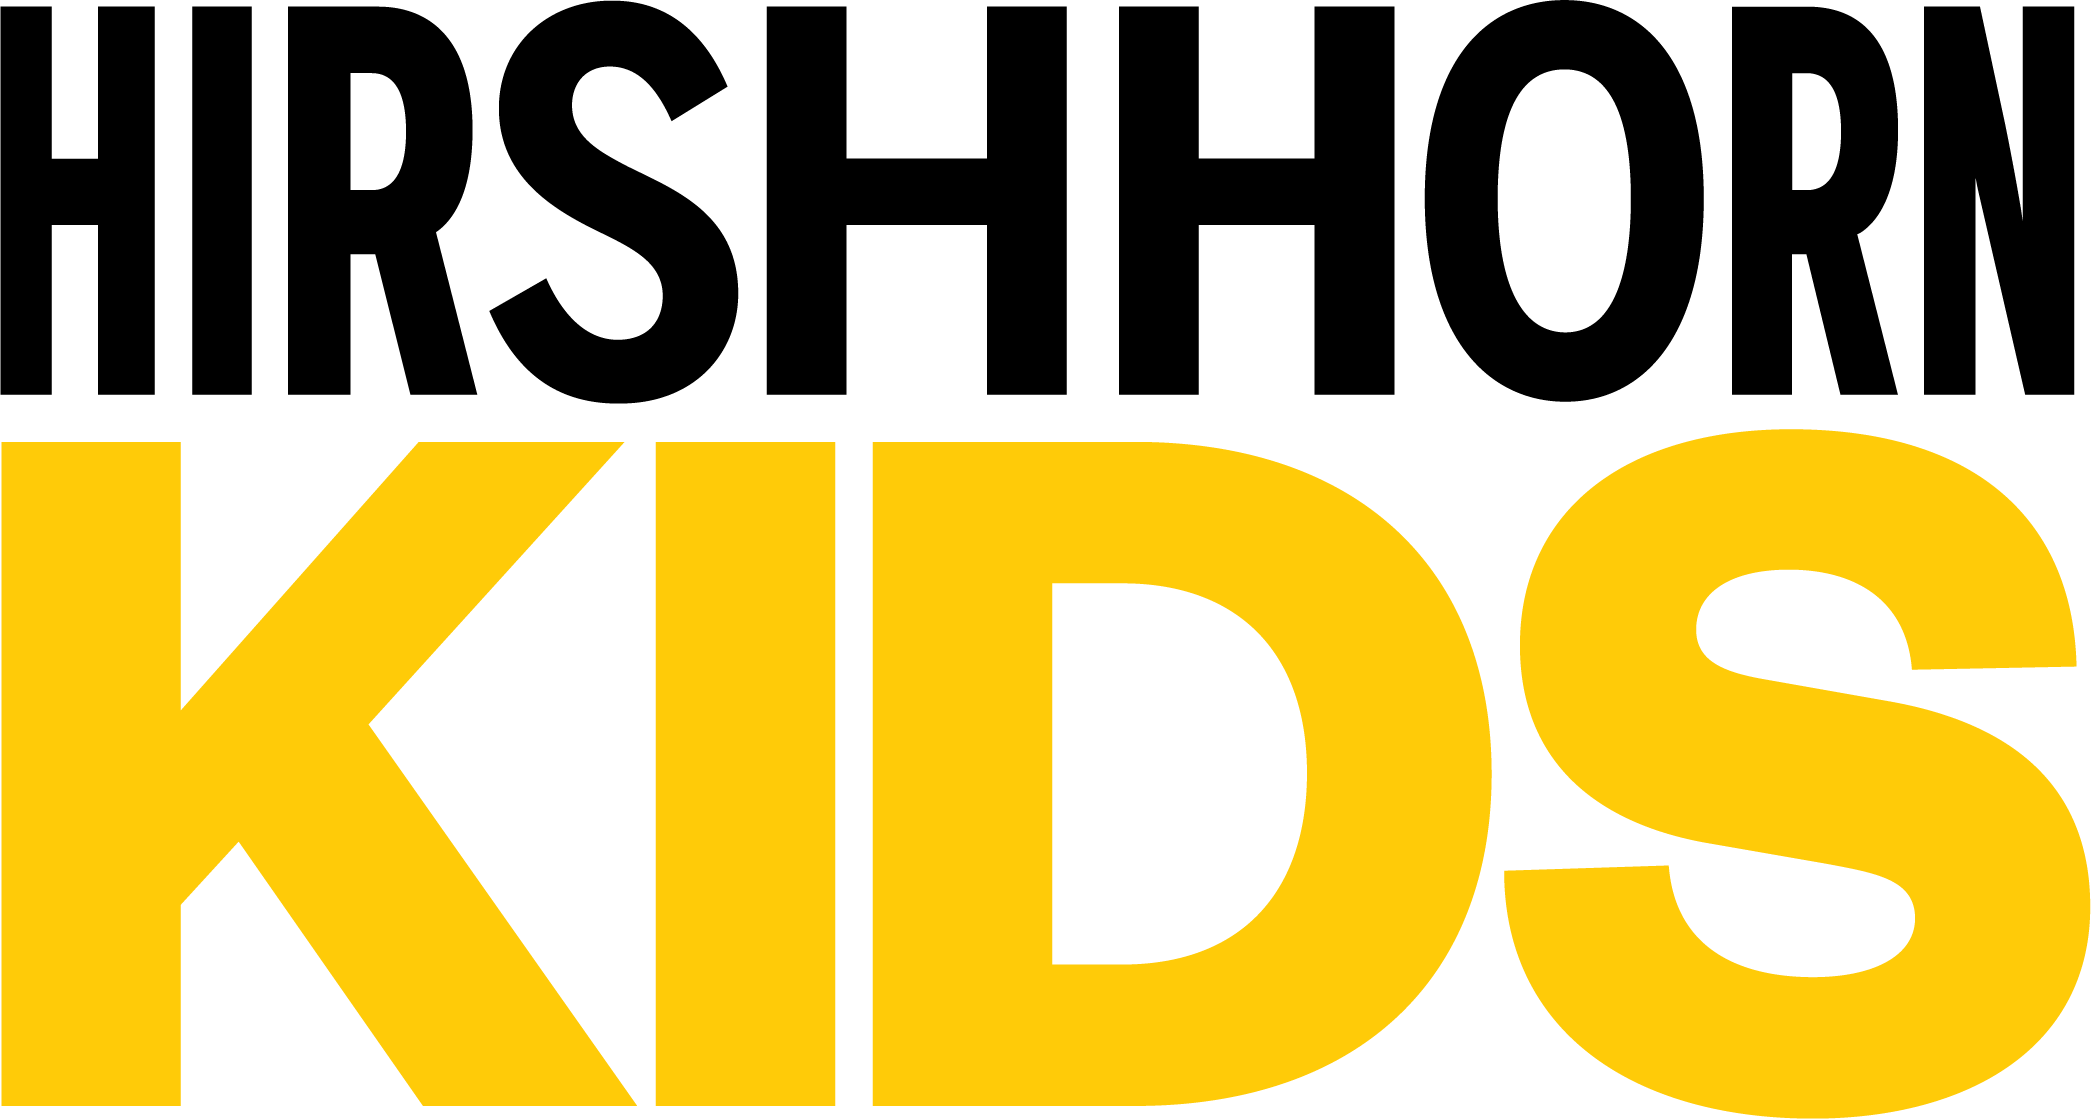 Hirshhorn Kids logo, simple black and yellow block letter text.